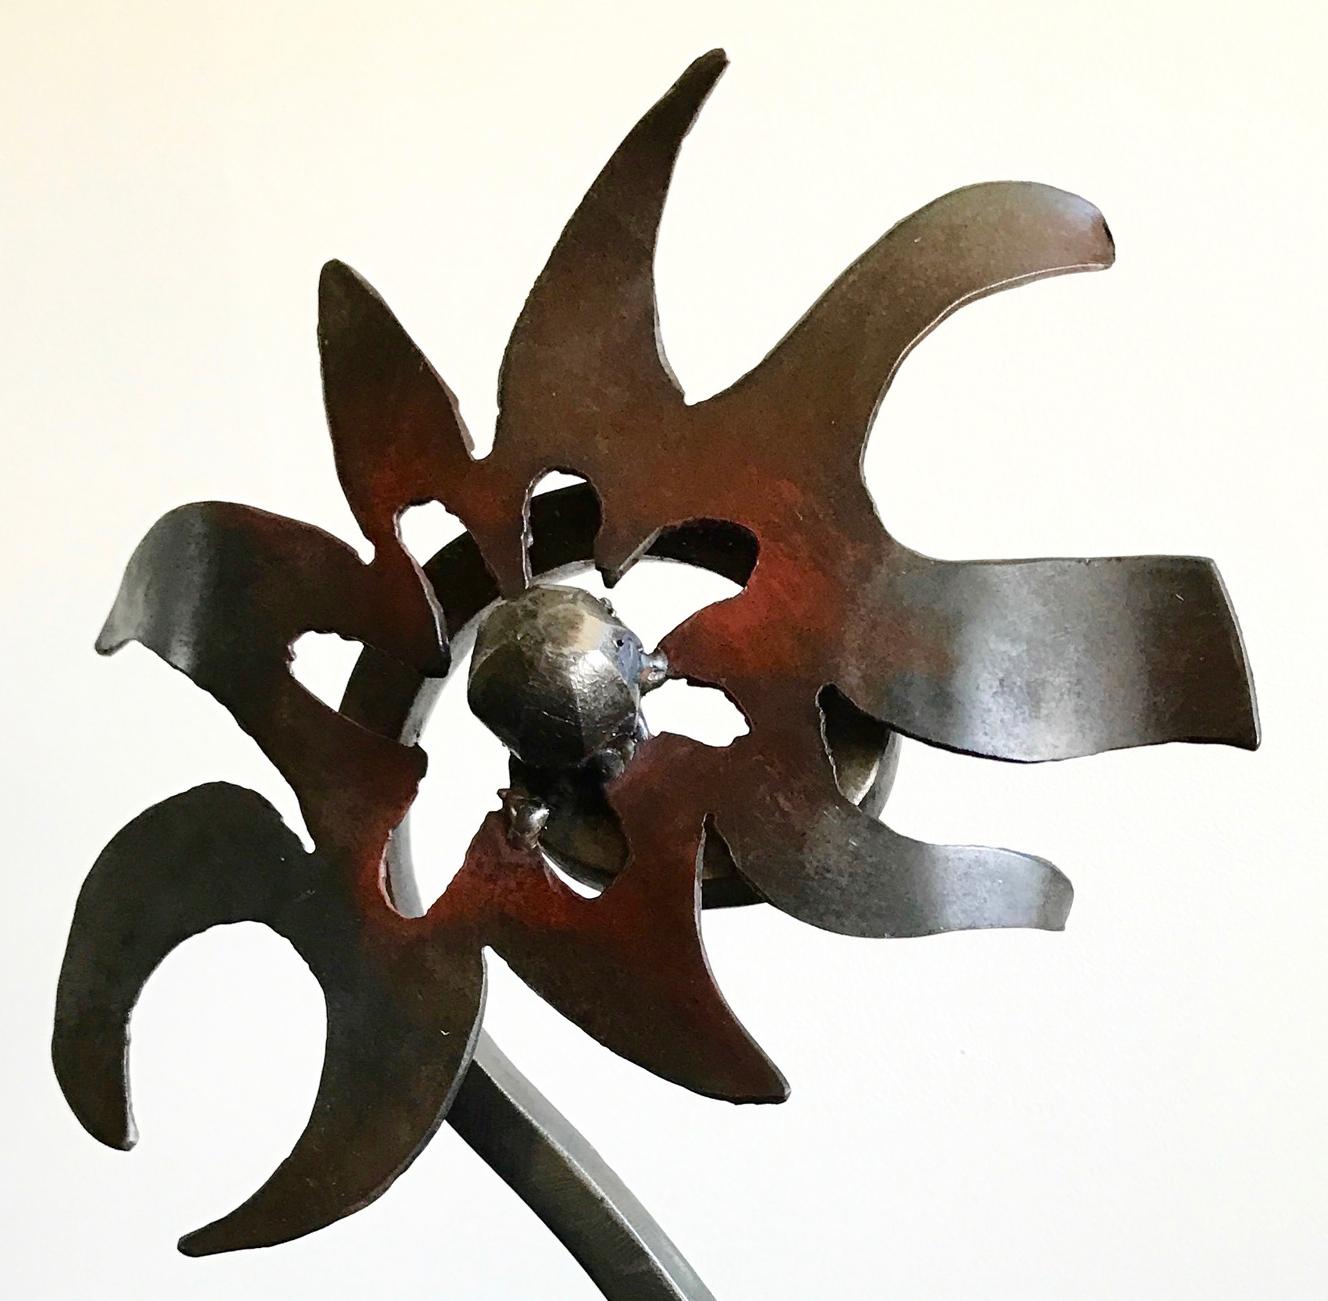 *Note - Currently on exhibition at the Plaxall Gallery until January 2020

Return of the Galactic Flower, welded steel abstraction,  conveys a monumental concept on  tabletop scale. In Rutkowski’s words, “The power if art is within each of us. It is